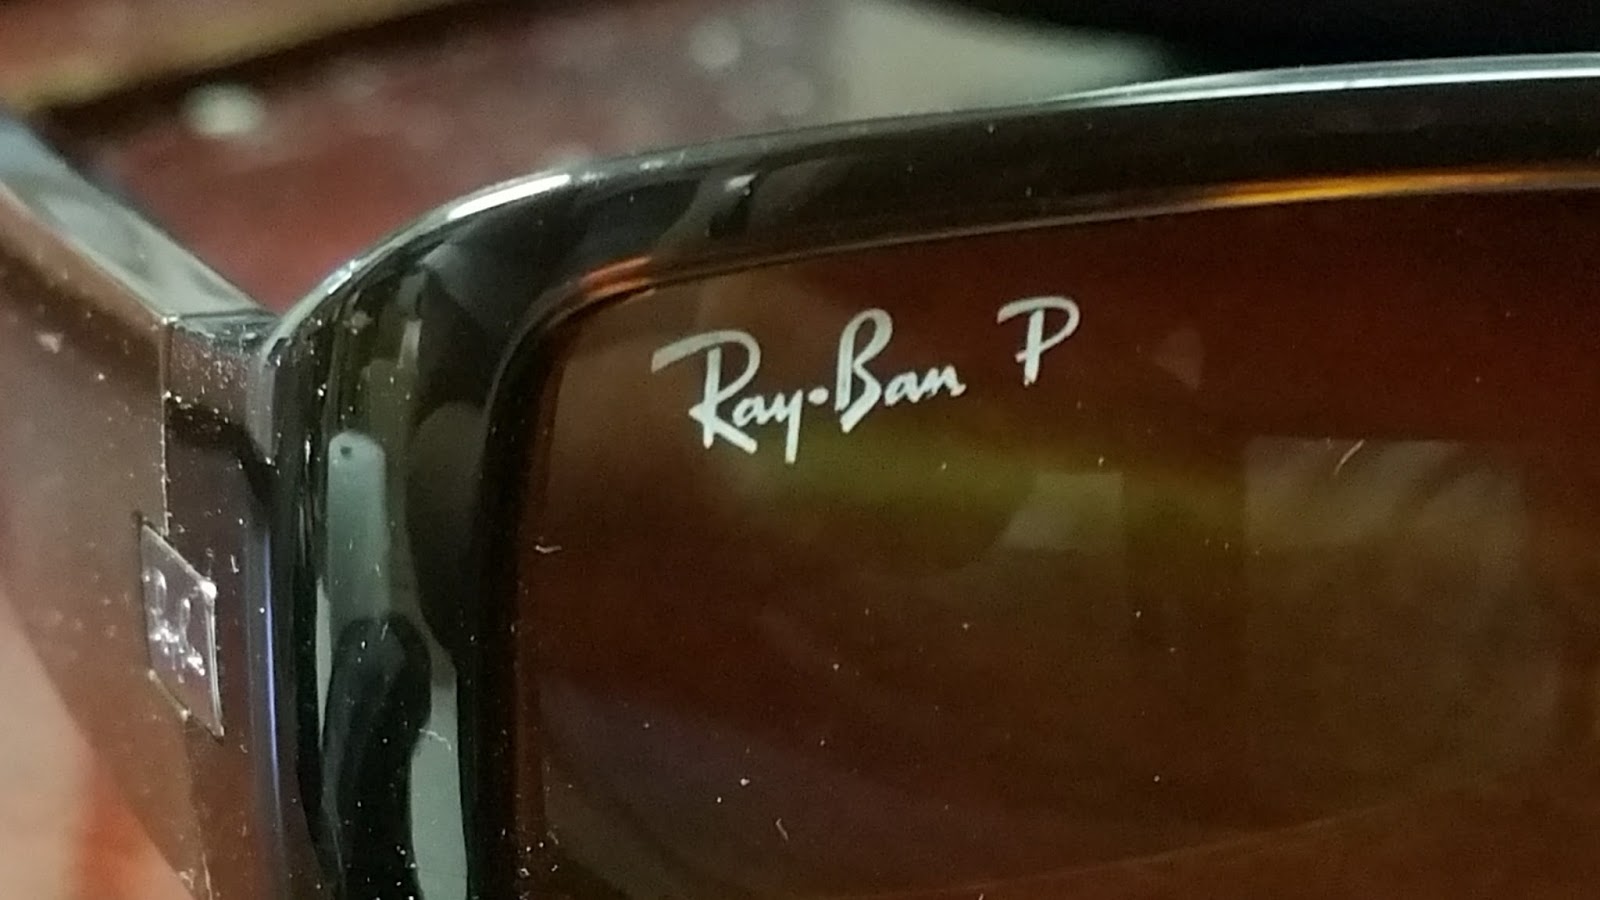 what is the meaning of ray ban p